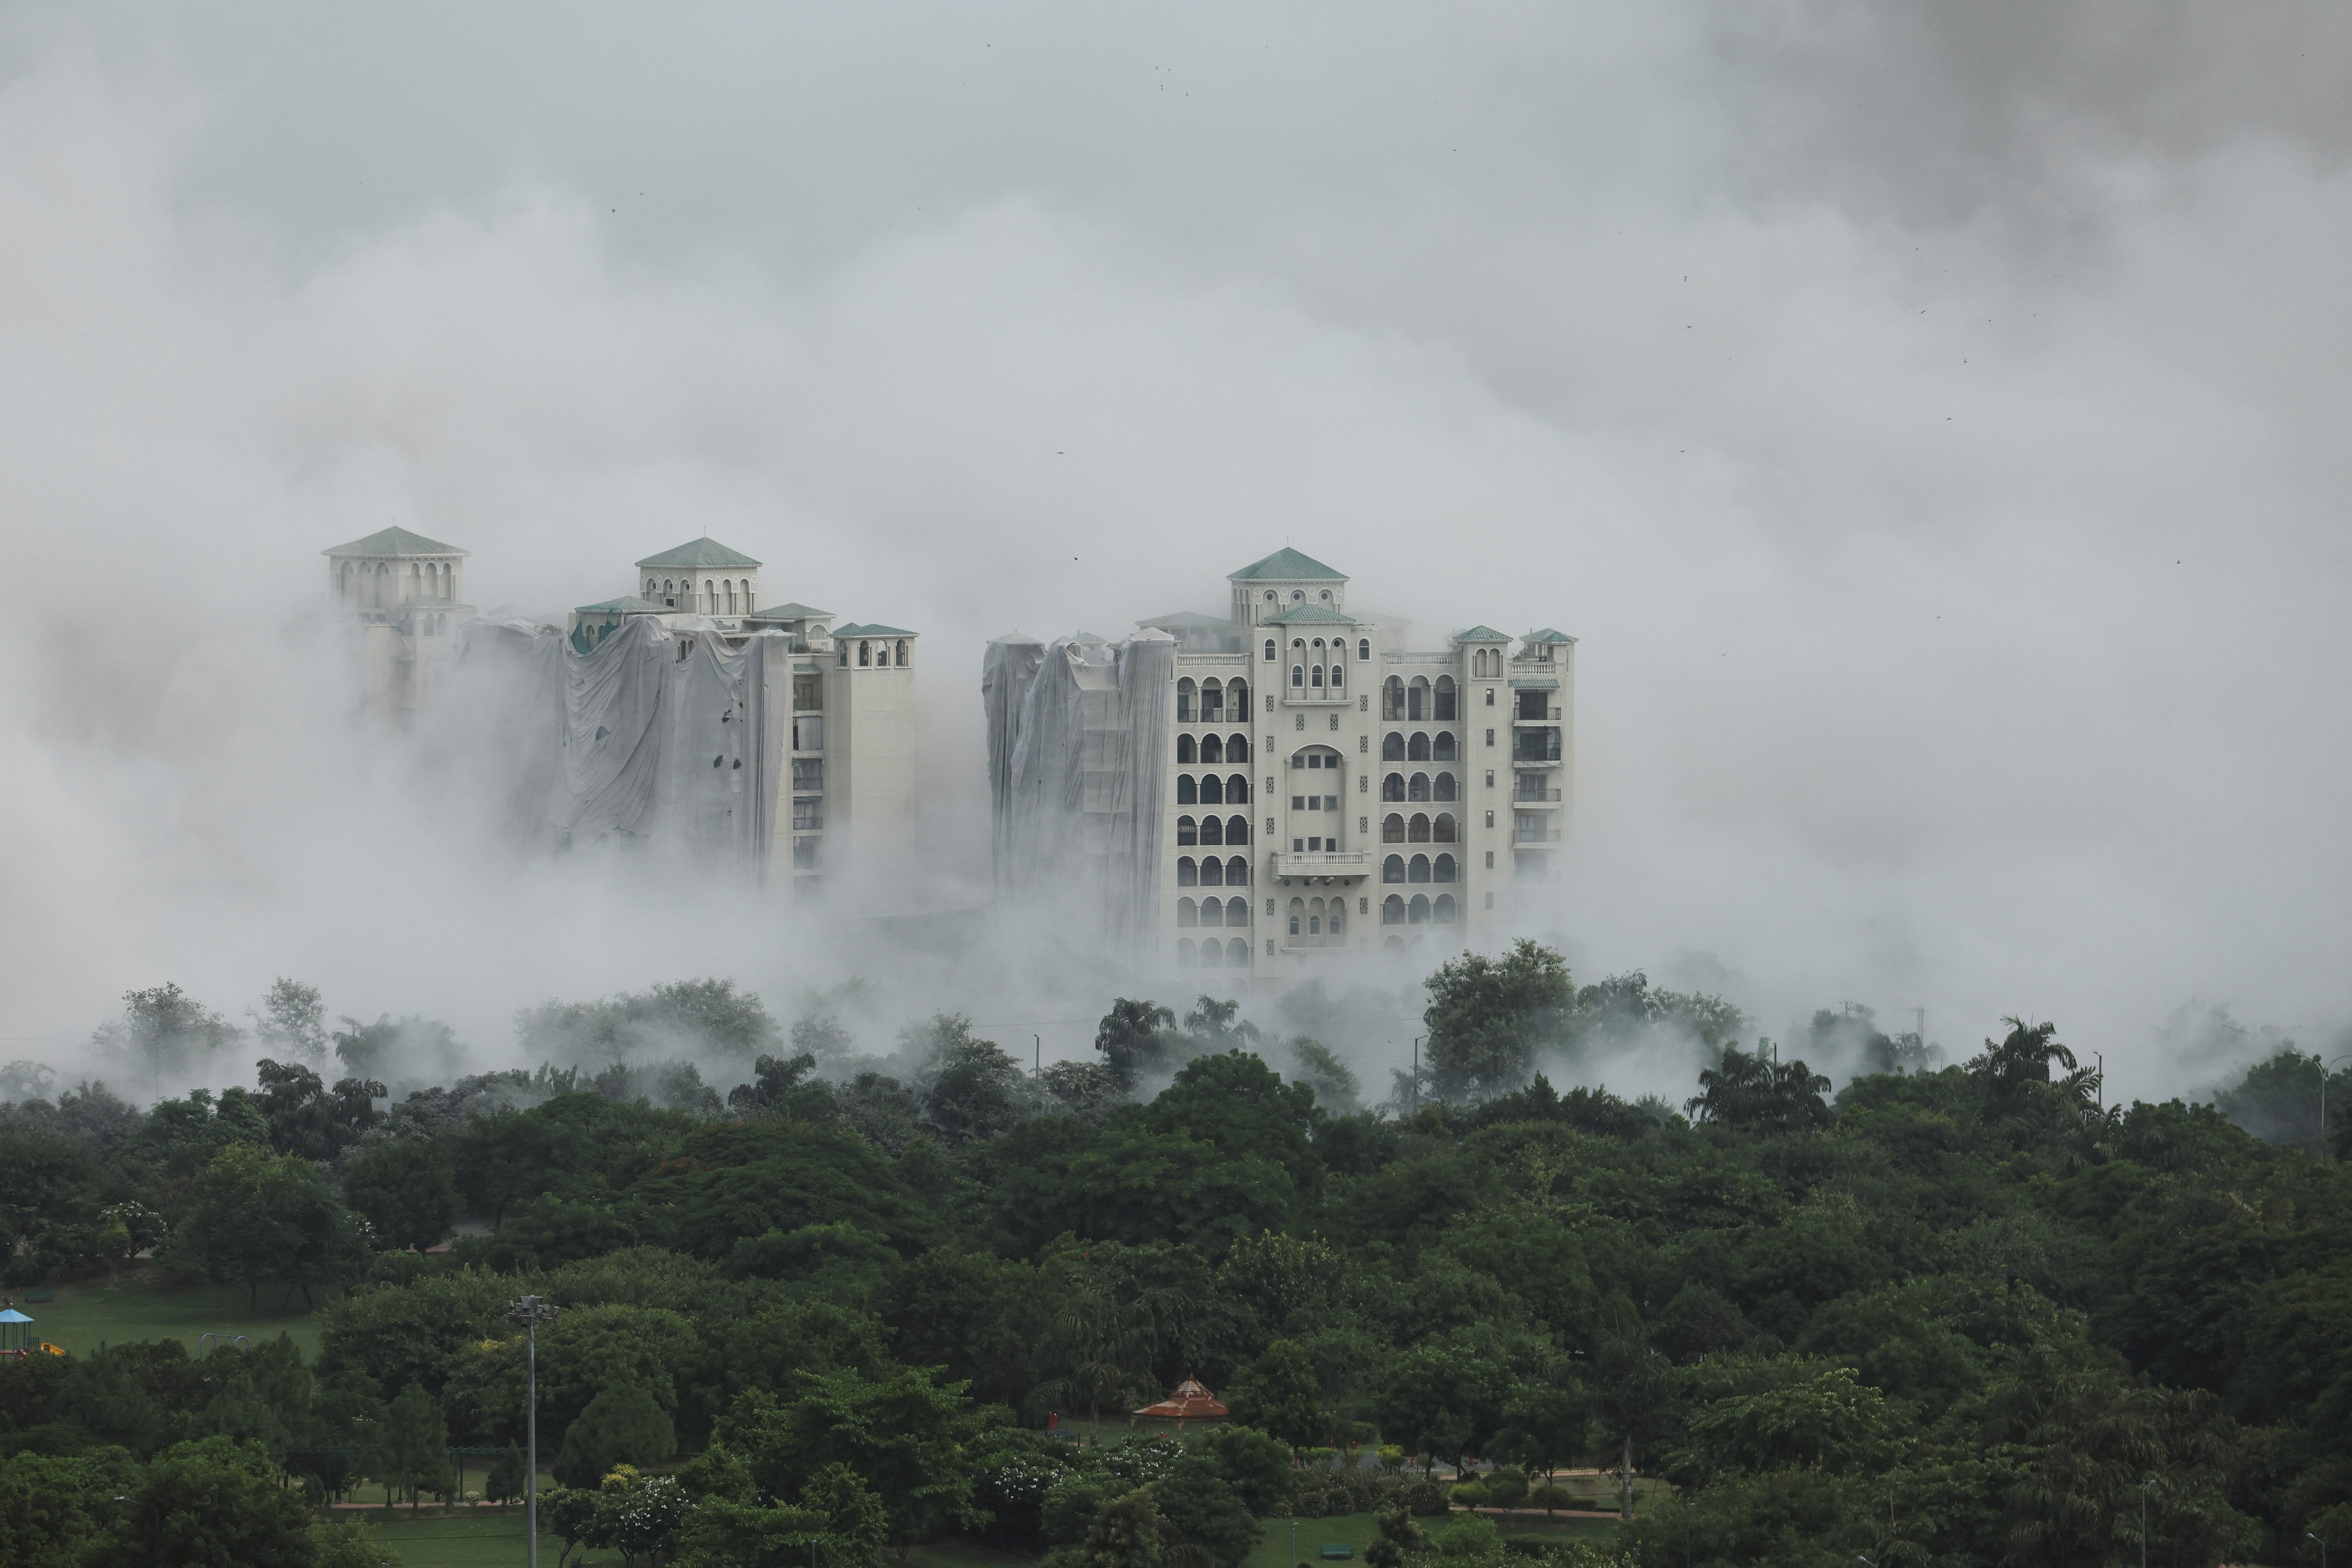 Dust plume engulfs surrounding buildings after controlled demolition